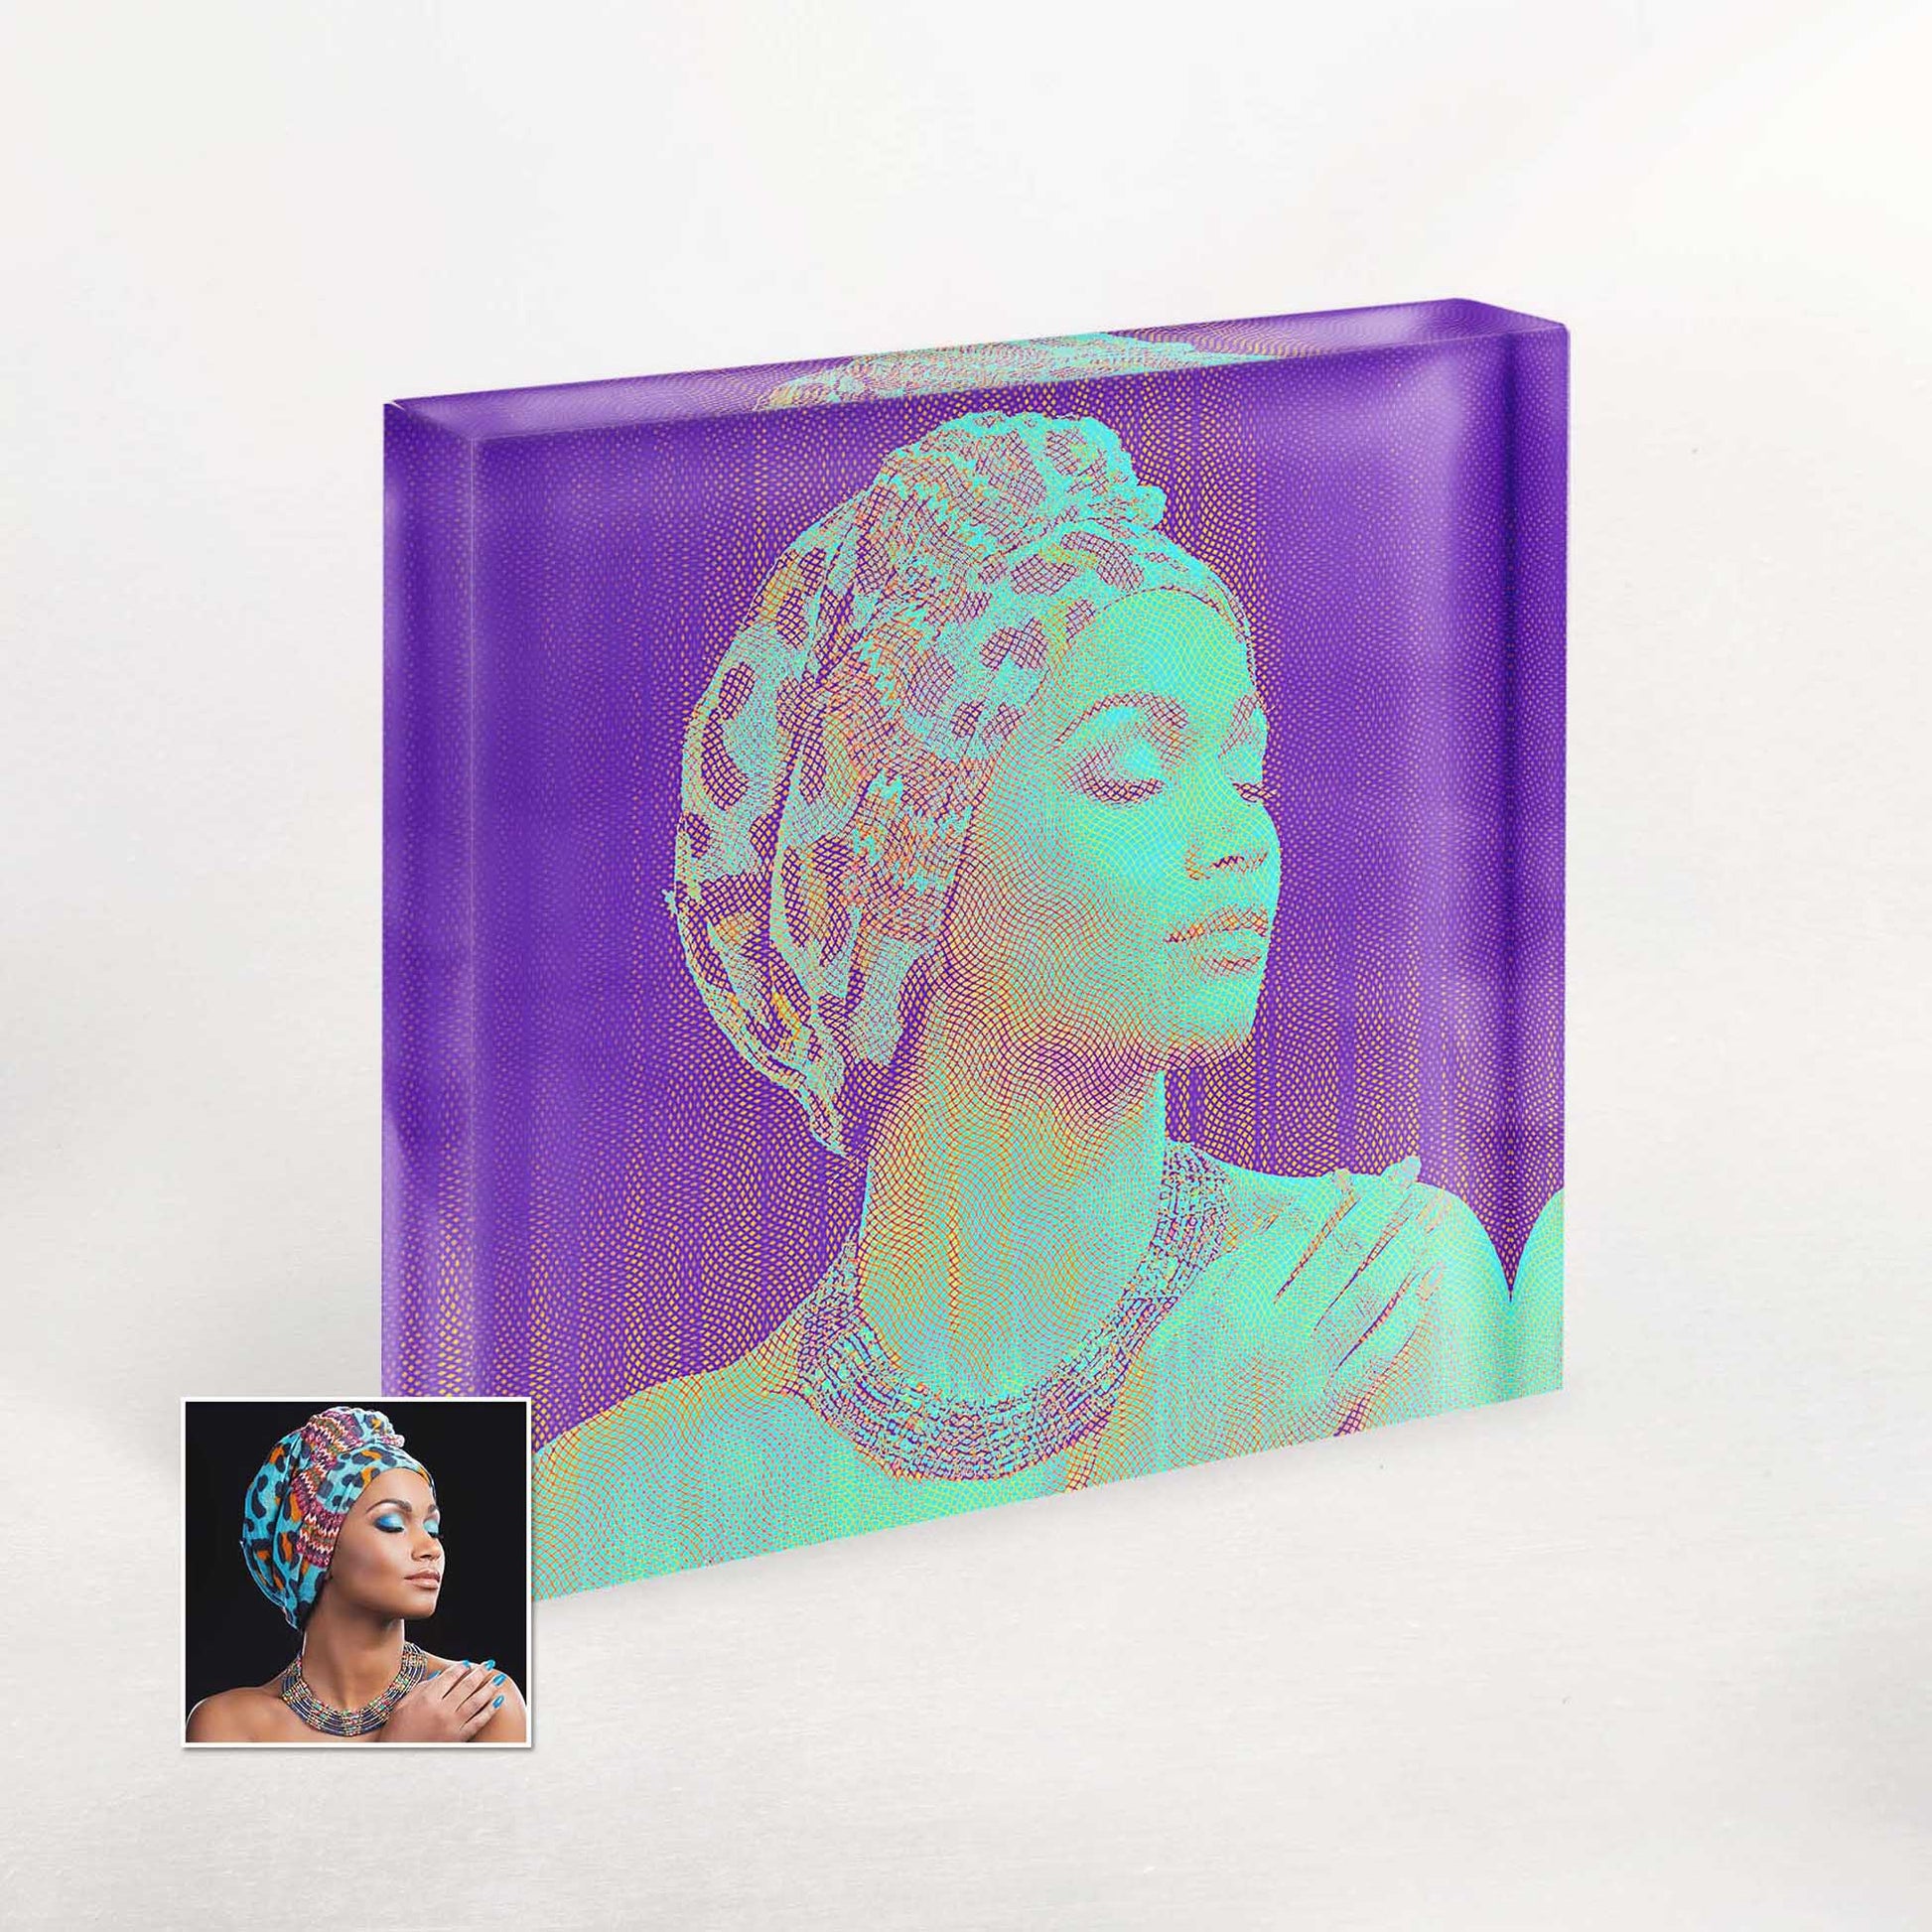 Personalised Blue Engraved Acrylic Block Photo: A Modern Touch for Home Decor. Surprise your boyfriend with a unique and stylish gift. The engraved photo, with a cool blue hue, will become a centerpiece in his modern living space.